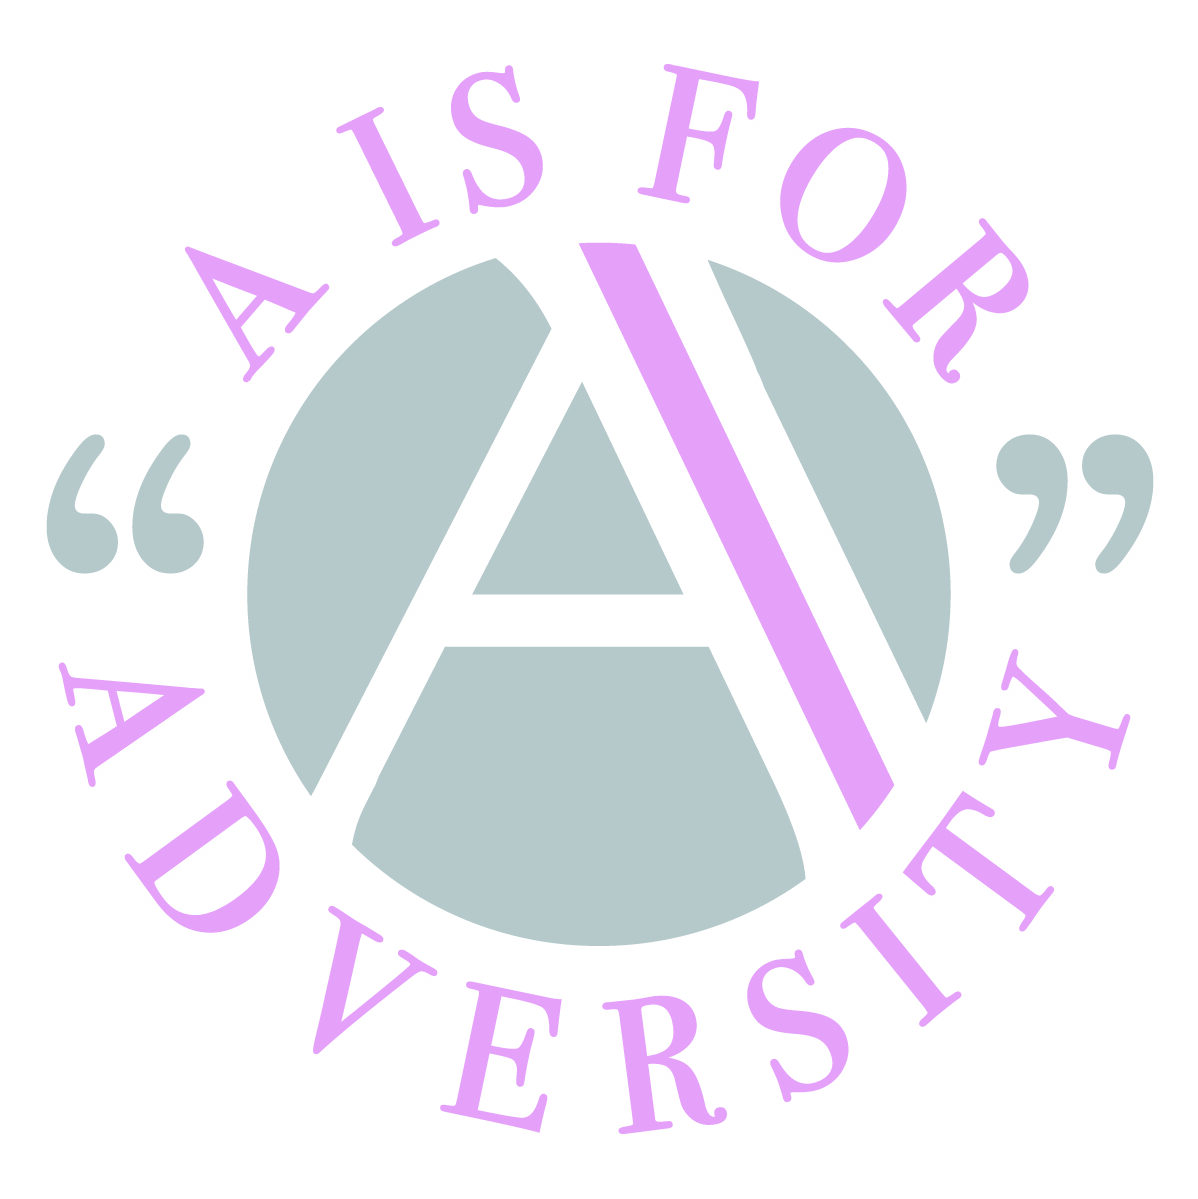 A is for Adversity